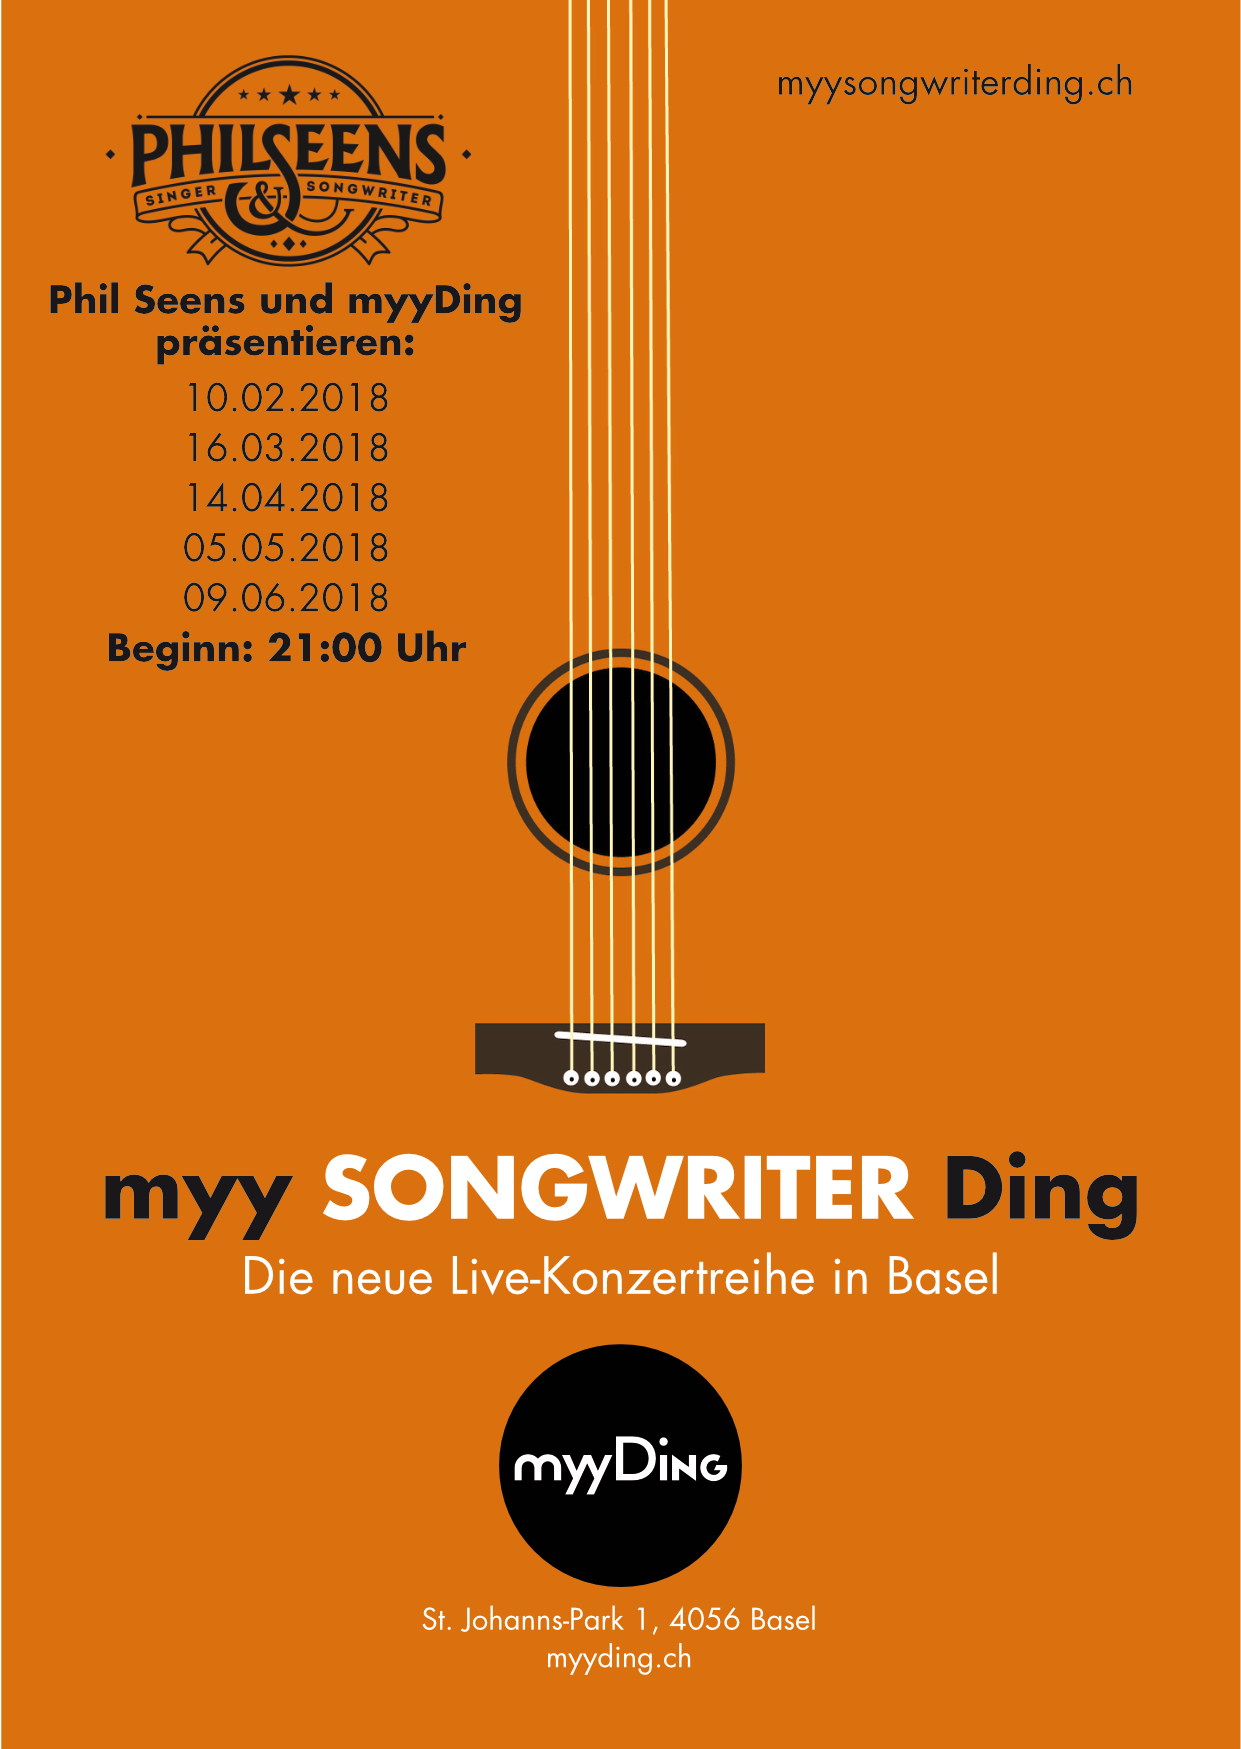 myy Songwriter Ding Frontpng